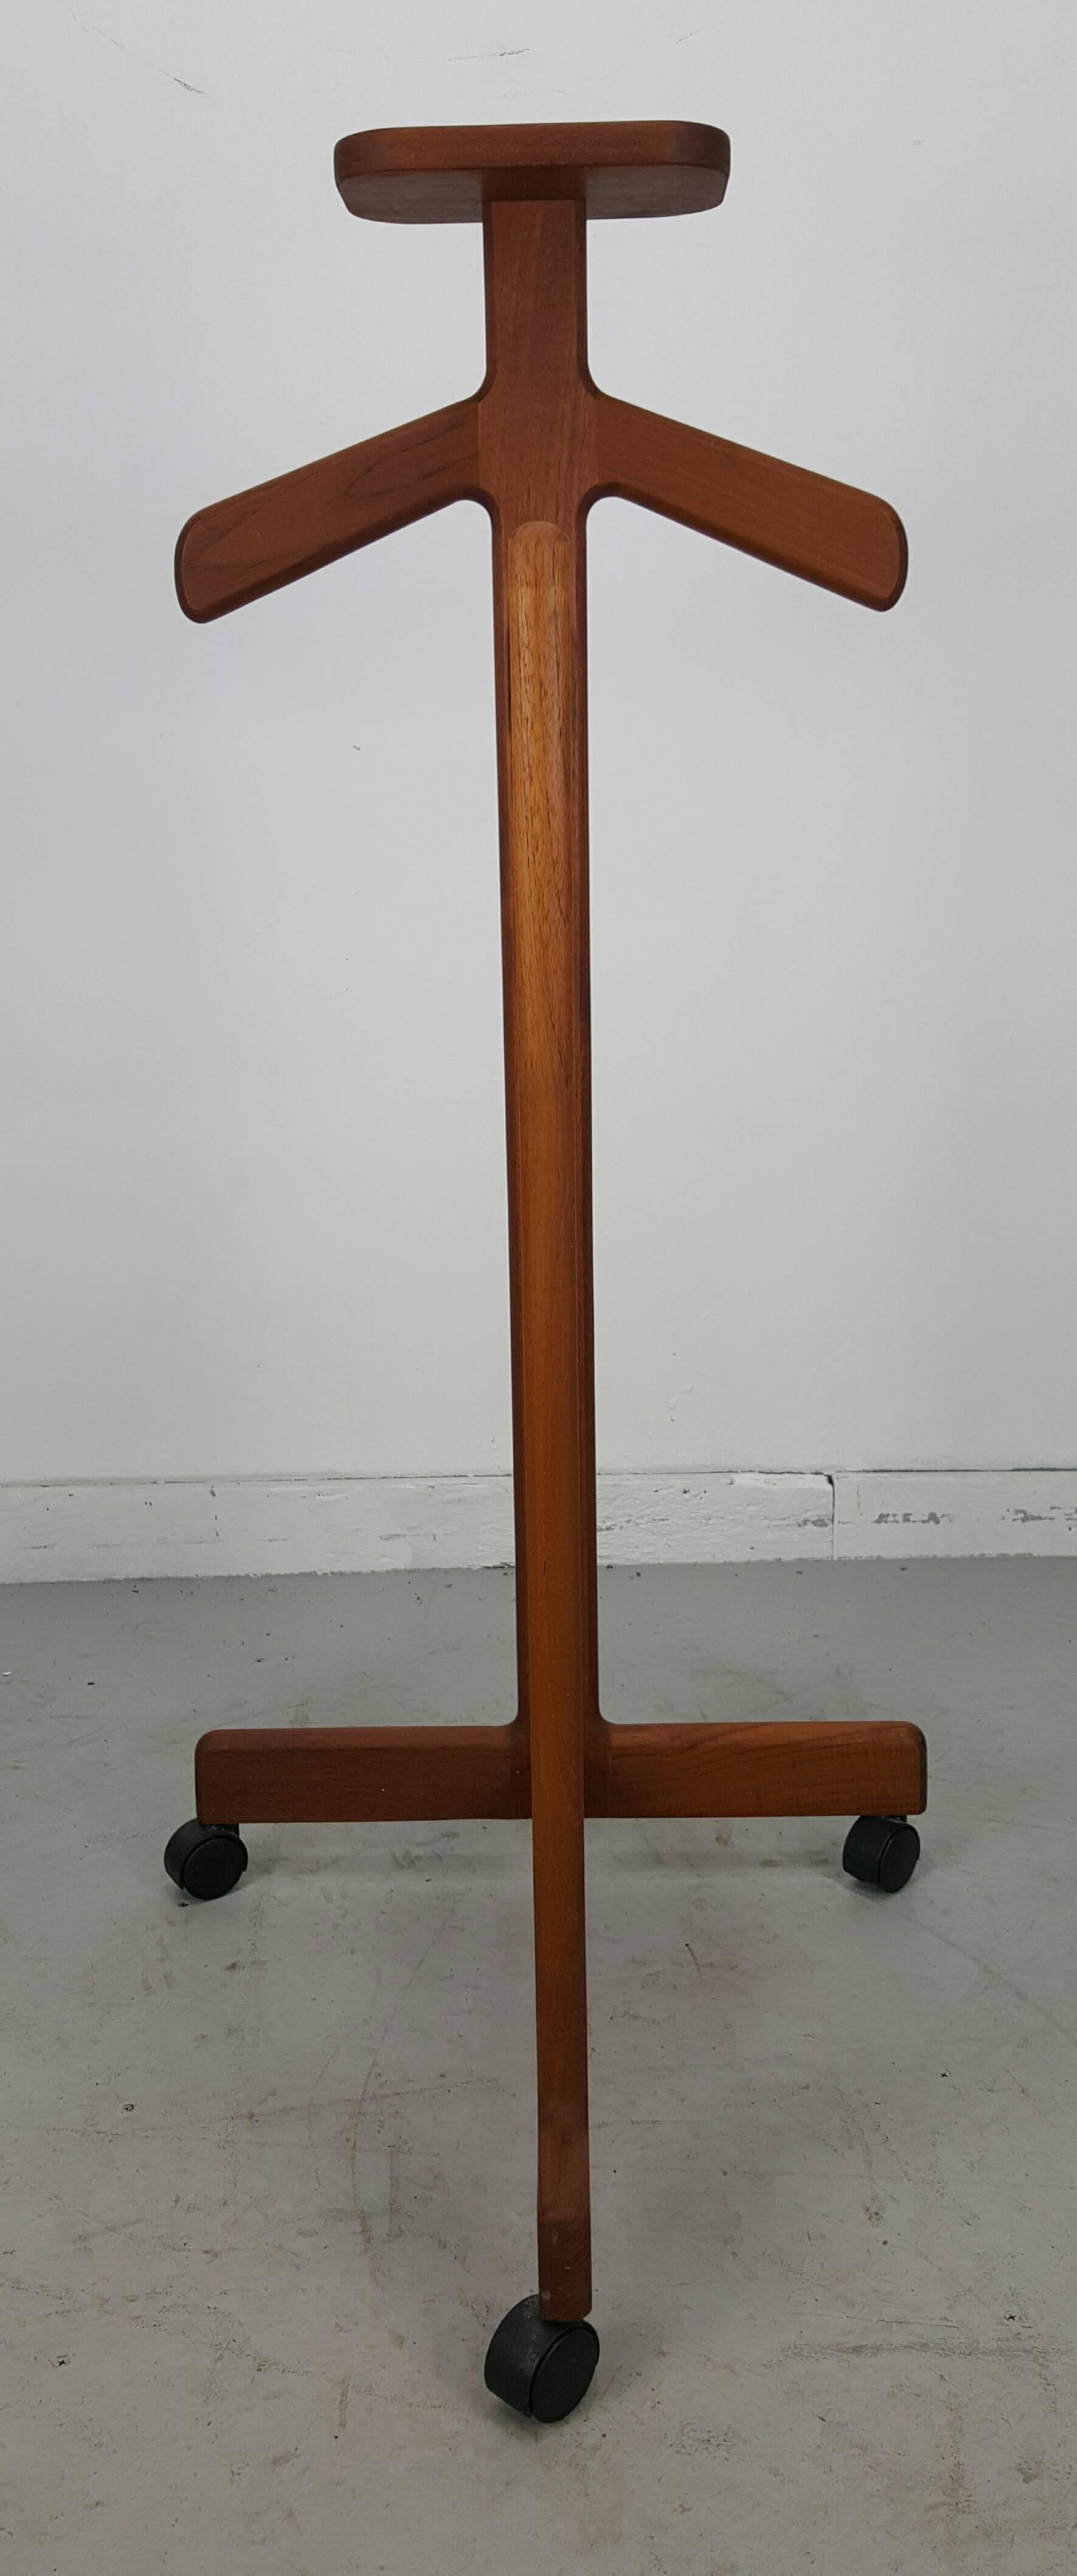 Mid-Century Modern teak valet by Johannes Sorth, Bornholm, Denmark. Amazing architectural design and proportion. Classic Danish teakwood joinery.